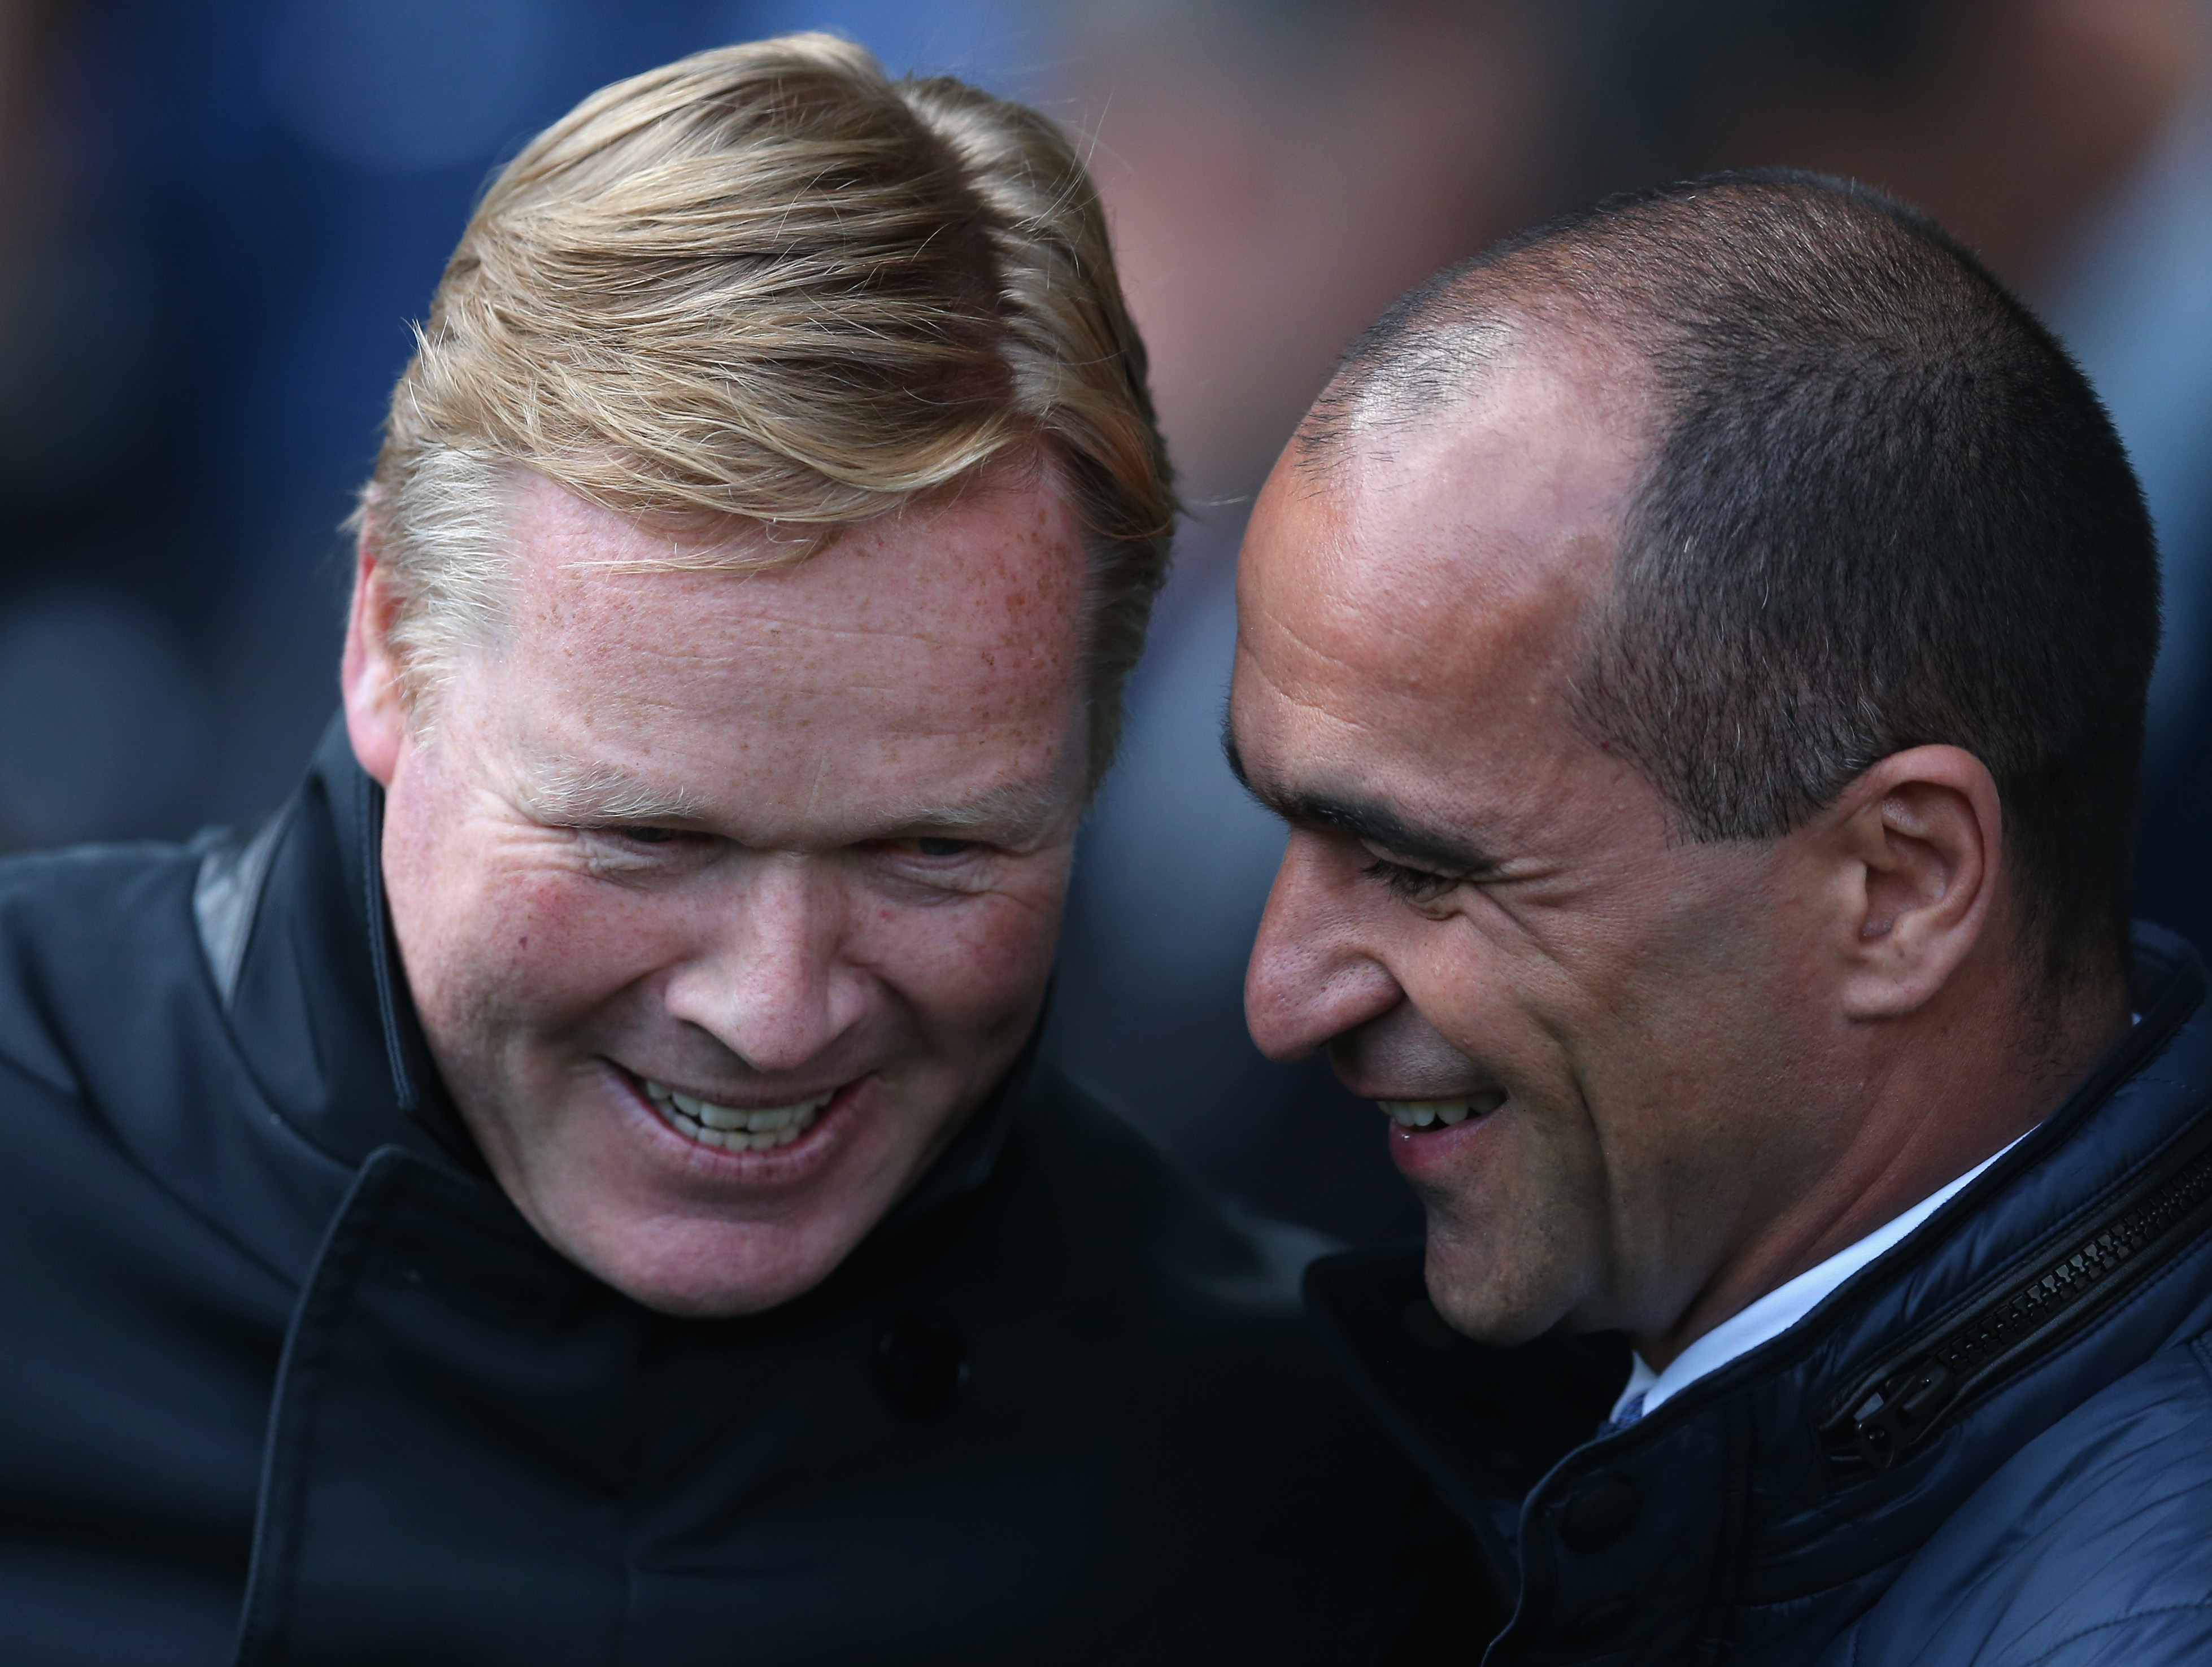 LIVERPOOL, ENGLAND - APRIL 16:  Roberto Martinez (R), manager of Everton greets Ronald Koeman, manager of Southampton during the Barclays Premier League match between Everton and Southampton at Goodison Park on April 16, 2016 in Liverpool, England.  (Photo by Chris Brunskill/Getty Images)